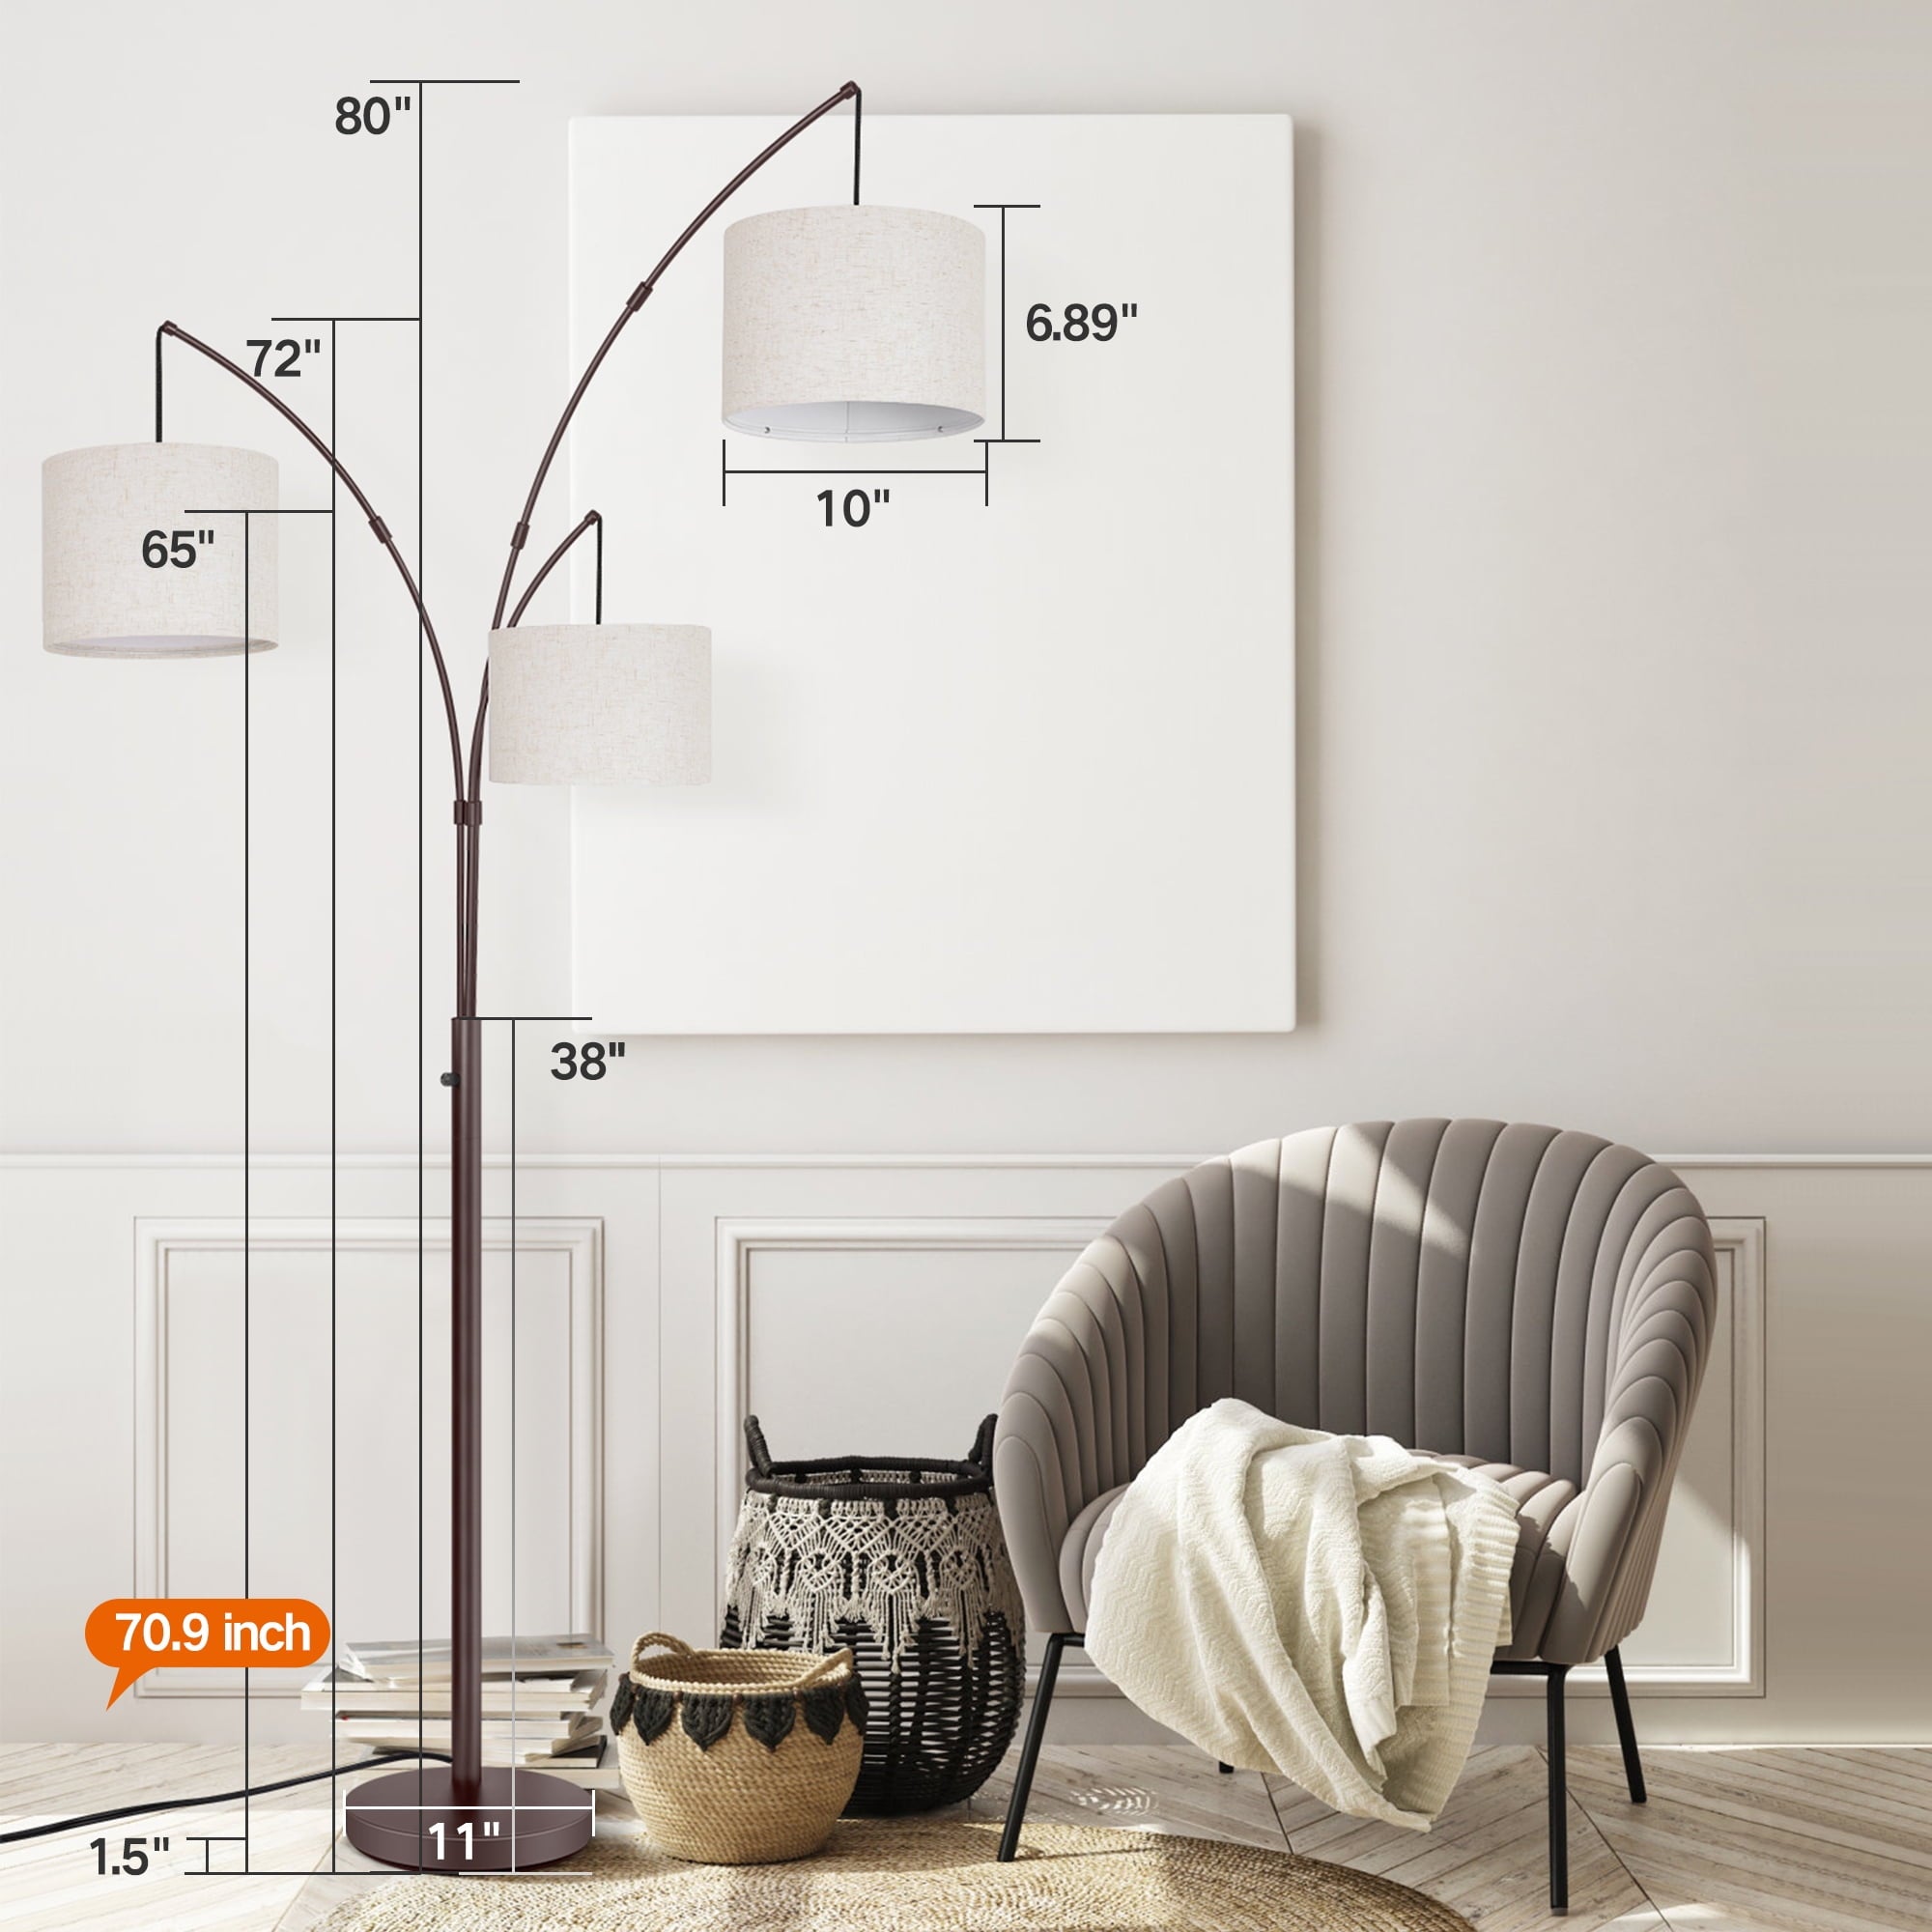 OUTON 80" Mordern Floor Lamp, 3 Light Arc Standing Lamp with Linen Lamp Shade for Living Room, Bedroom, 3 Bulbs Includes(Brown)